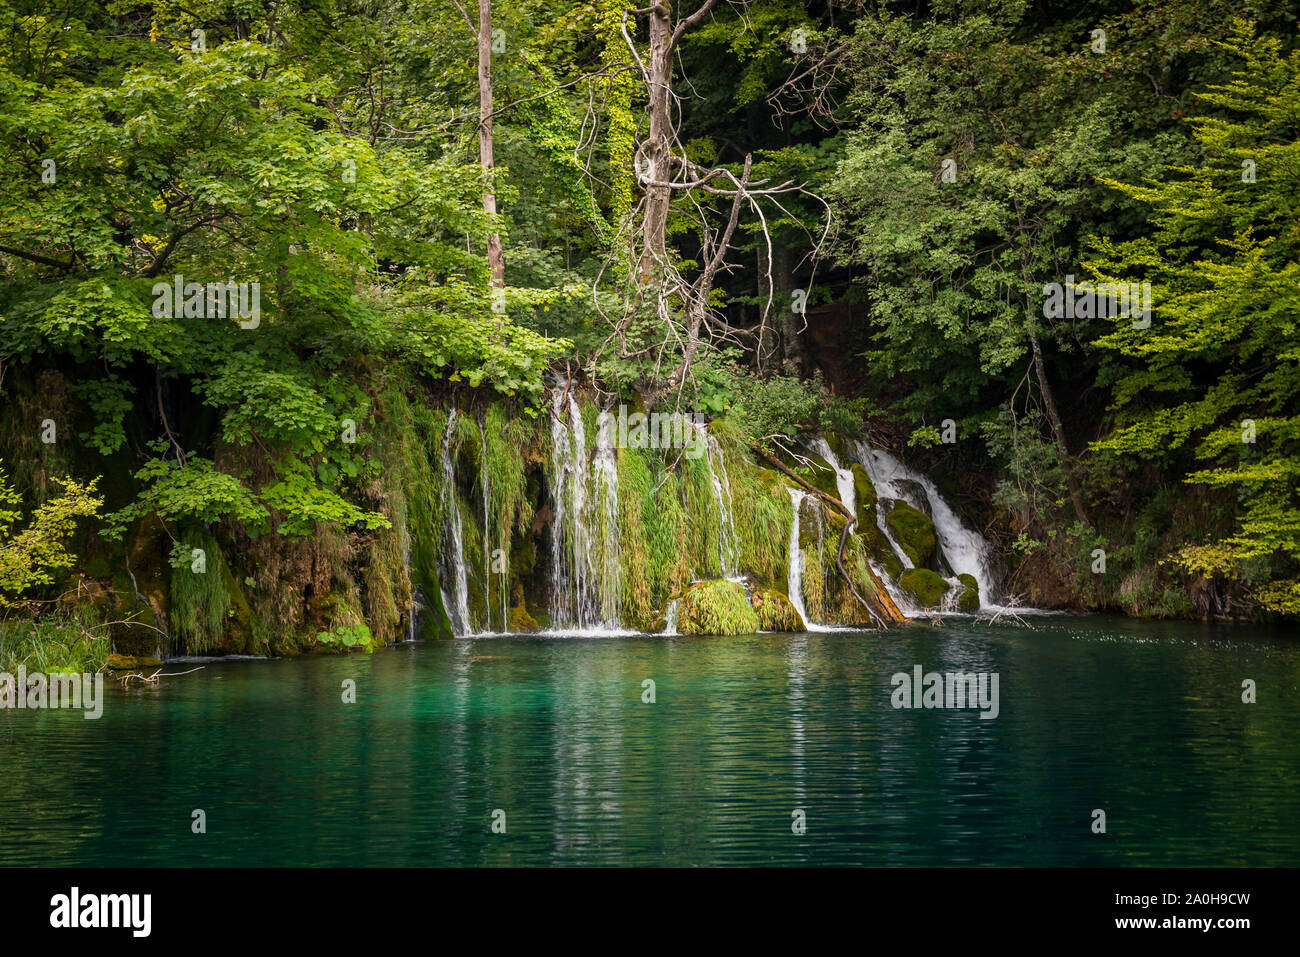 Amazing waterfalls in the forest in Plitvice lakes National Park, Croatia. Nature landscape Stock Photo